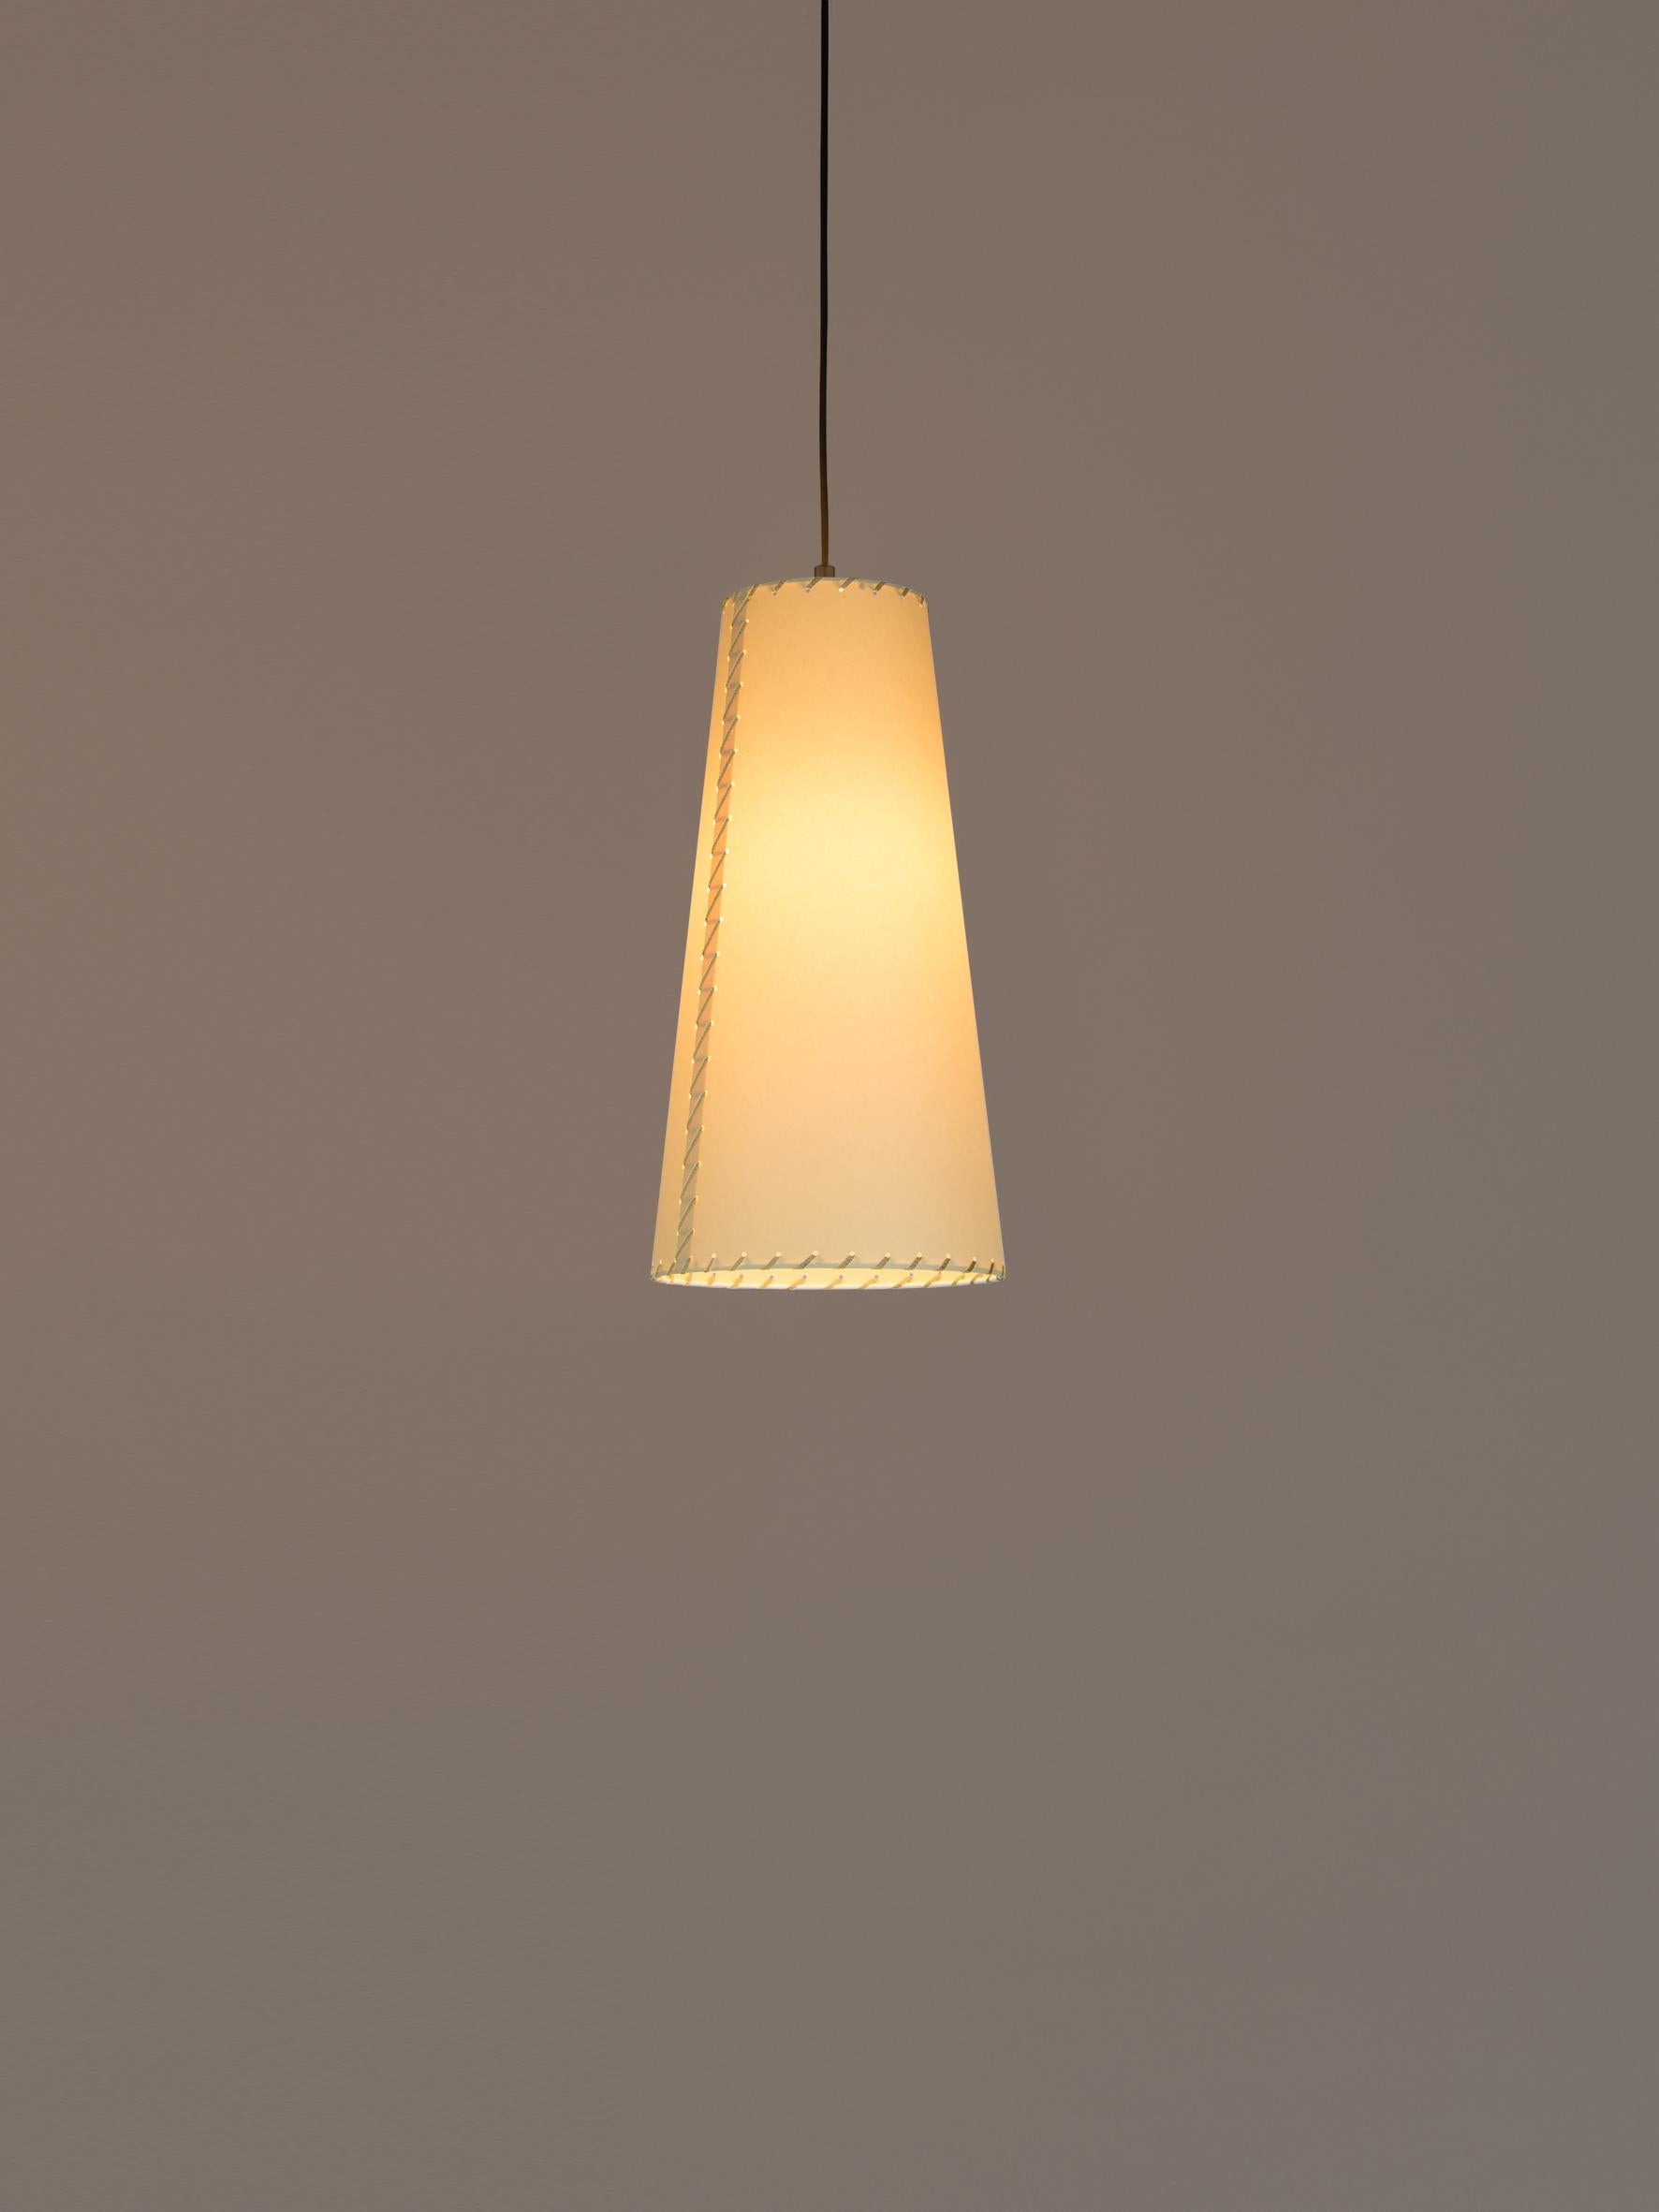 Sísísí Cónicas largas MT2 pendant lamp by Gabriel Ordeig Cole
Dimensions: D 20 x H 40 cm
Materials: Metal, stitched parchment.

The GT4 and MT2 lamps consist of a conical shade made of stitched cardboard, to be repeated in spaces where a warm